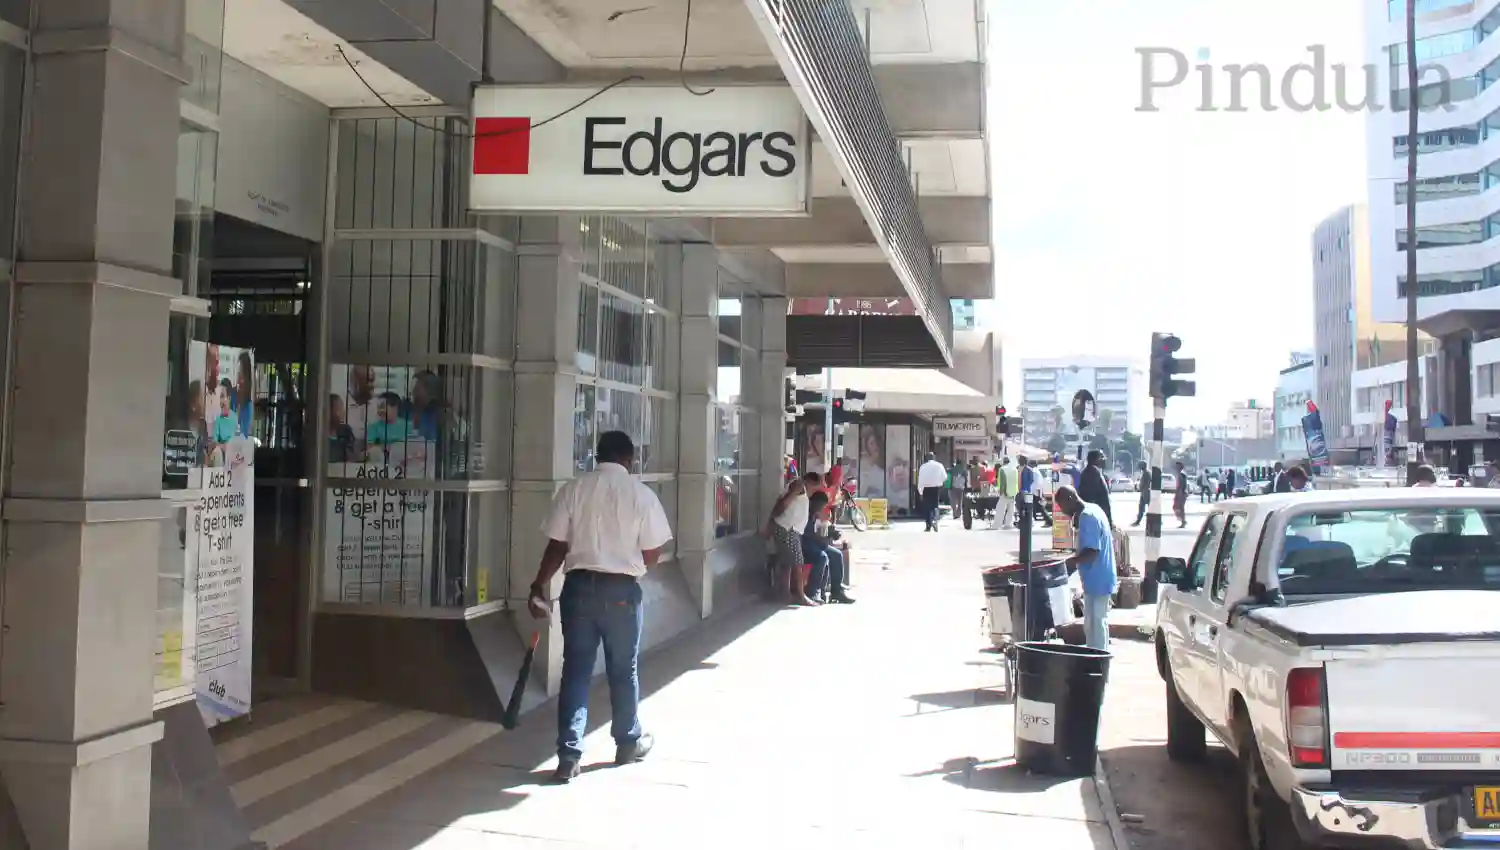 Edgars In Trouble For Violating Money Laundering Laws